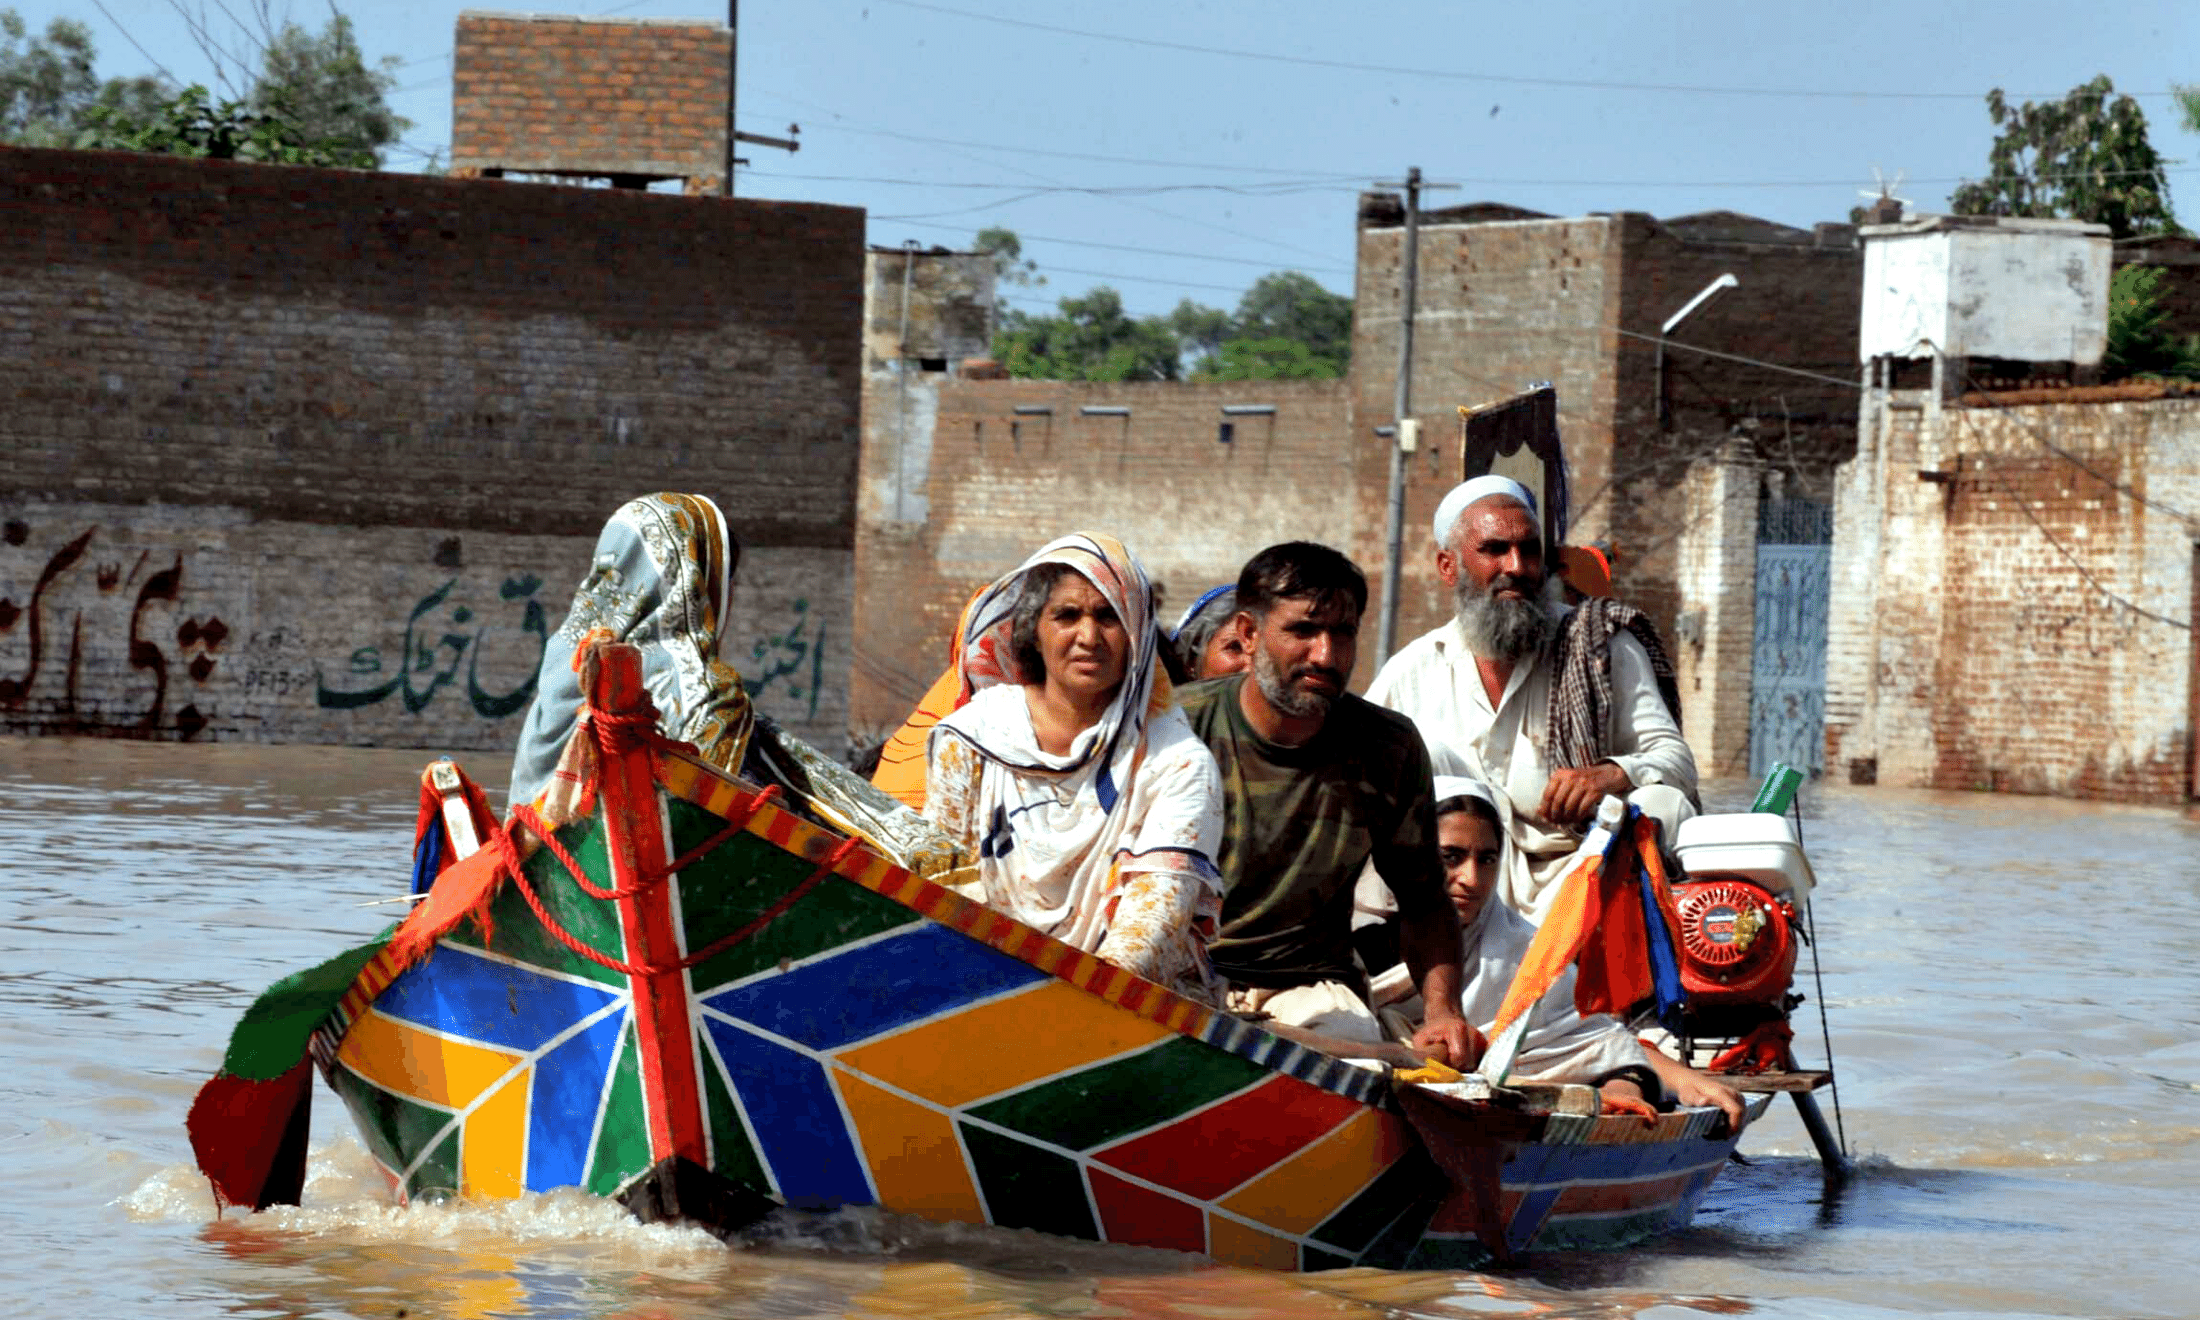 As floods batter Pakistan, local organisers are racing against time